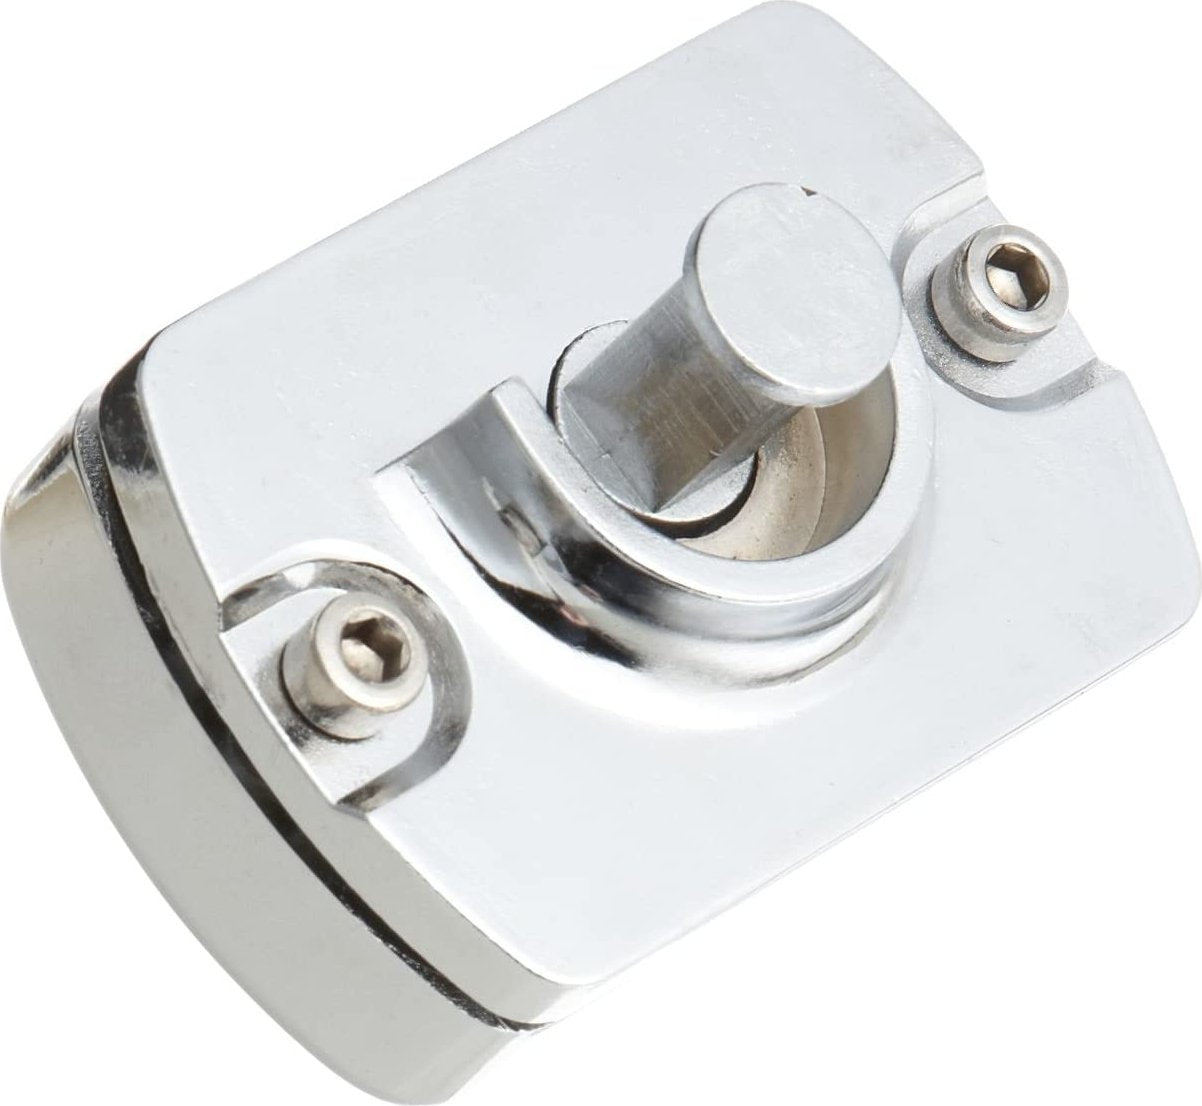 Browne - Hinge Assemblies For Chafer Harmony & Octave Series - 575170-3